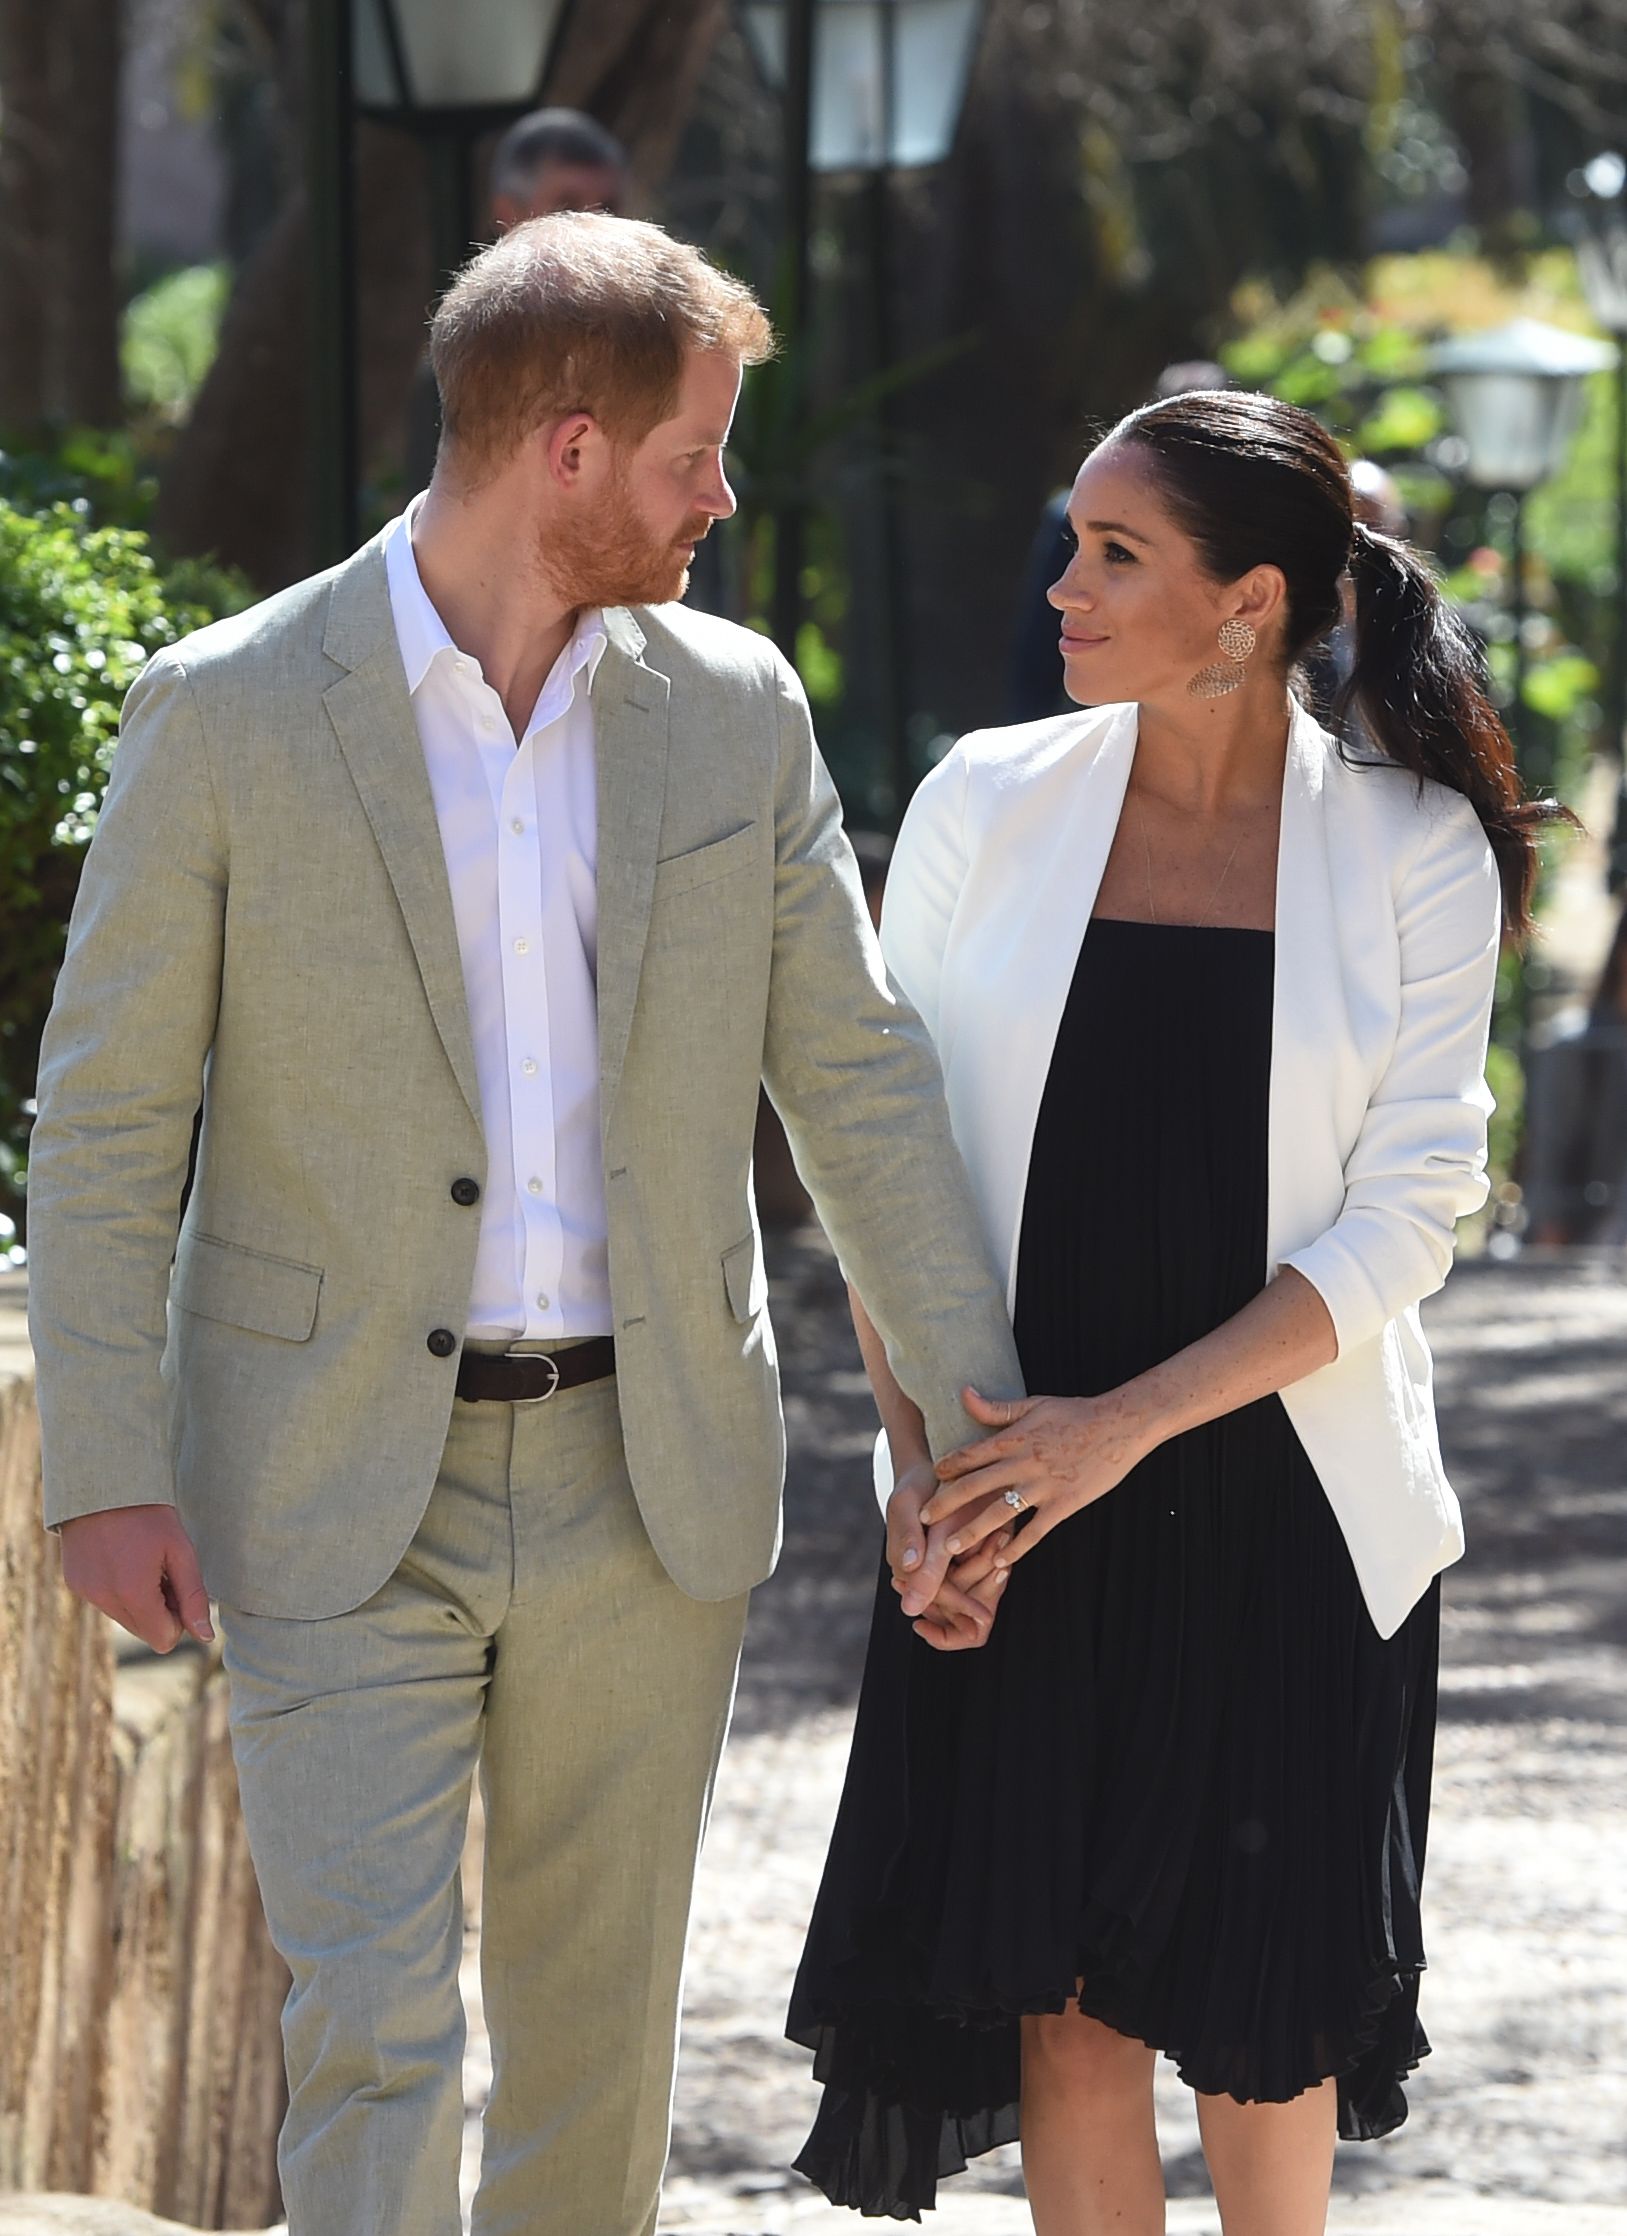 Prince Harry, Duke of Sussex and Meghan, Duchess of Sussex walk through the walled public Andalusian Gardens which has exotic plants, flowers and fruit trees during a visit on February 25, 2019 in Rabat, Morocco. | Photo: Getty Images